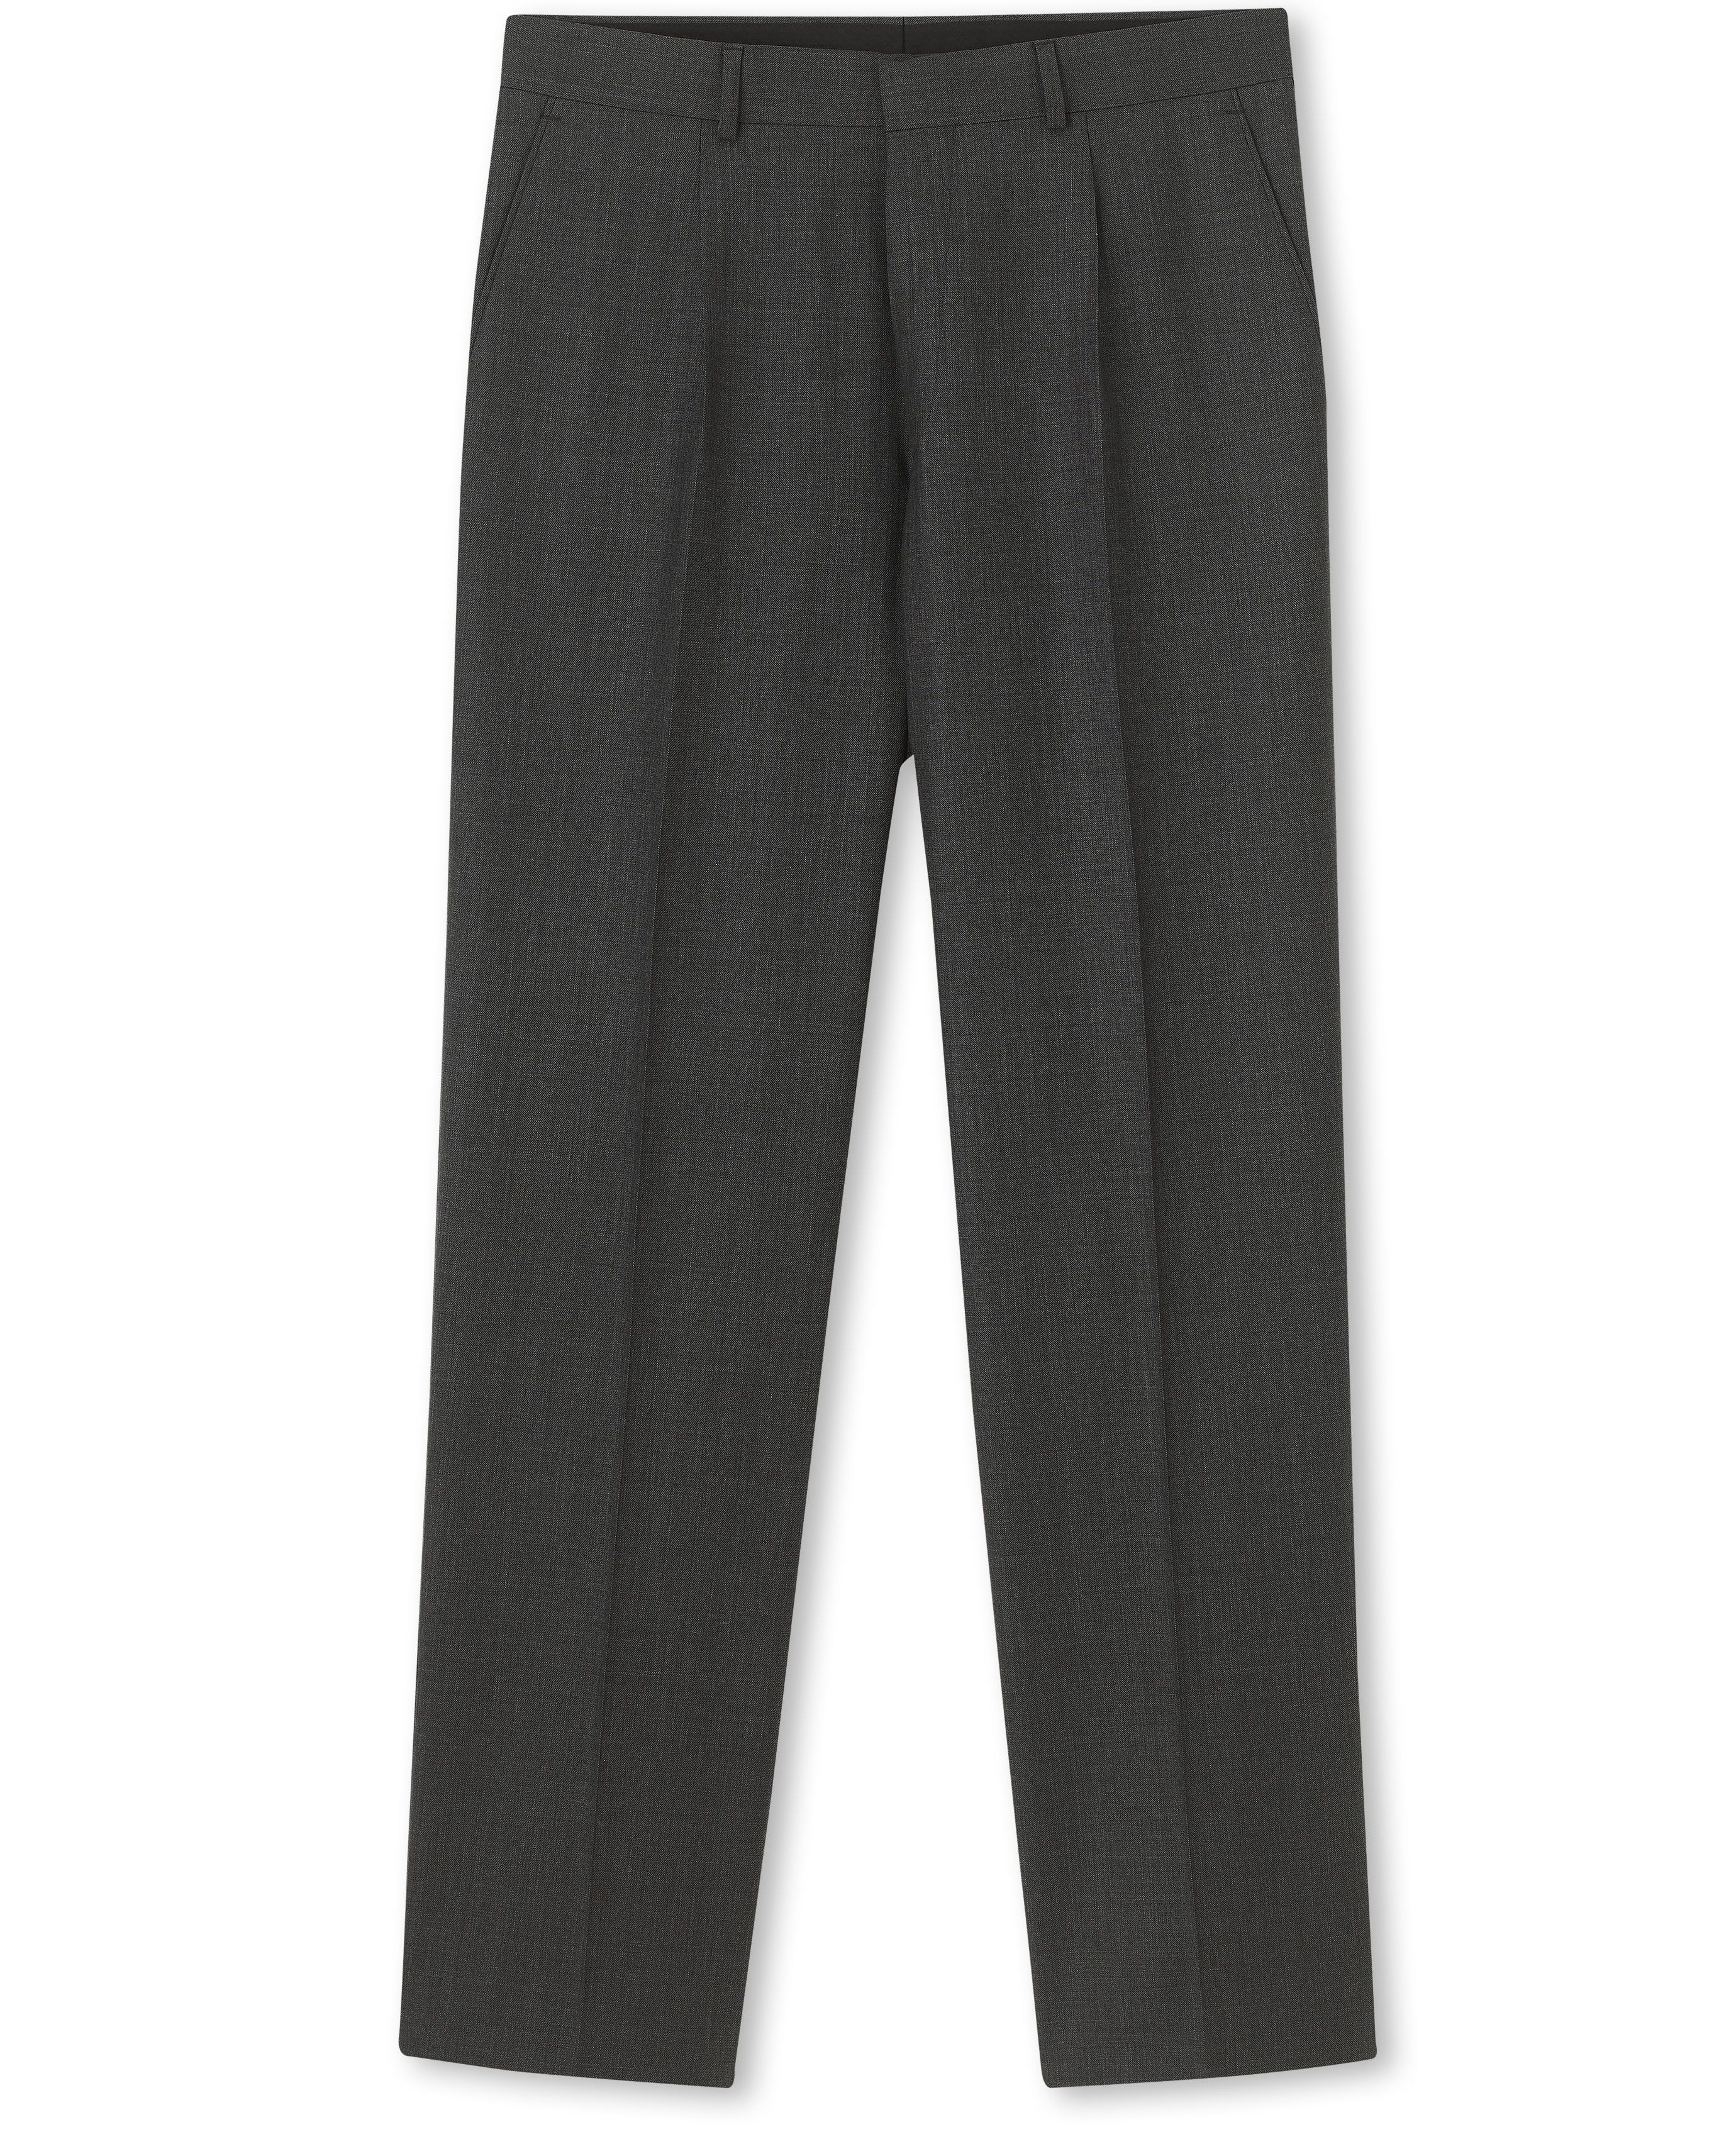 Classic Fit Formal Trousers in Grey Microdot | Savile Row Co